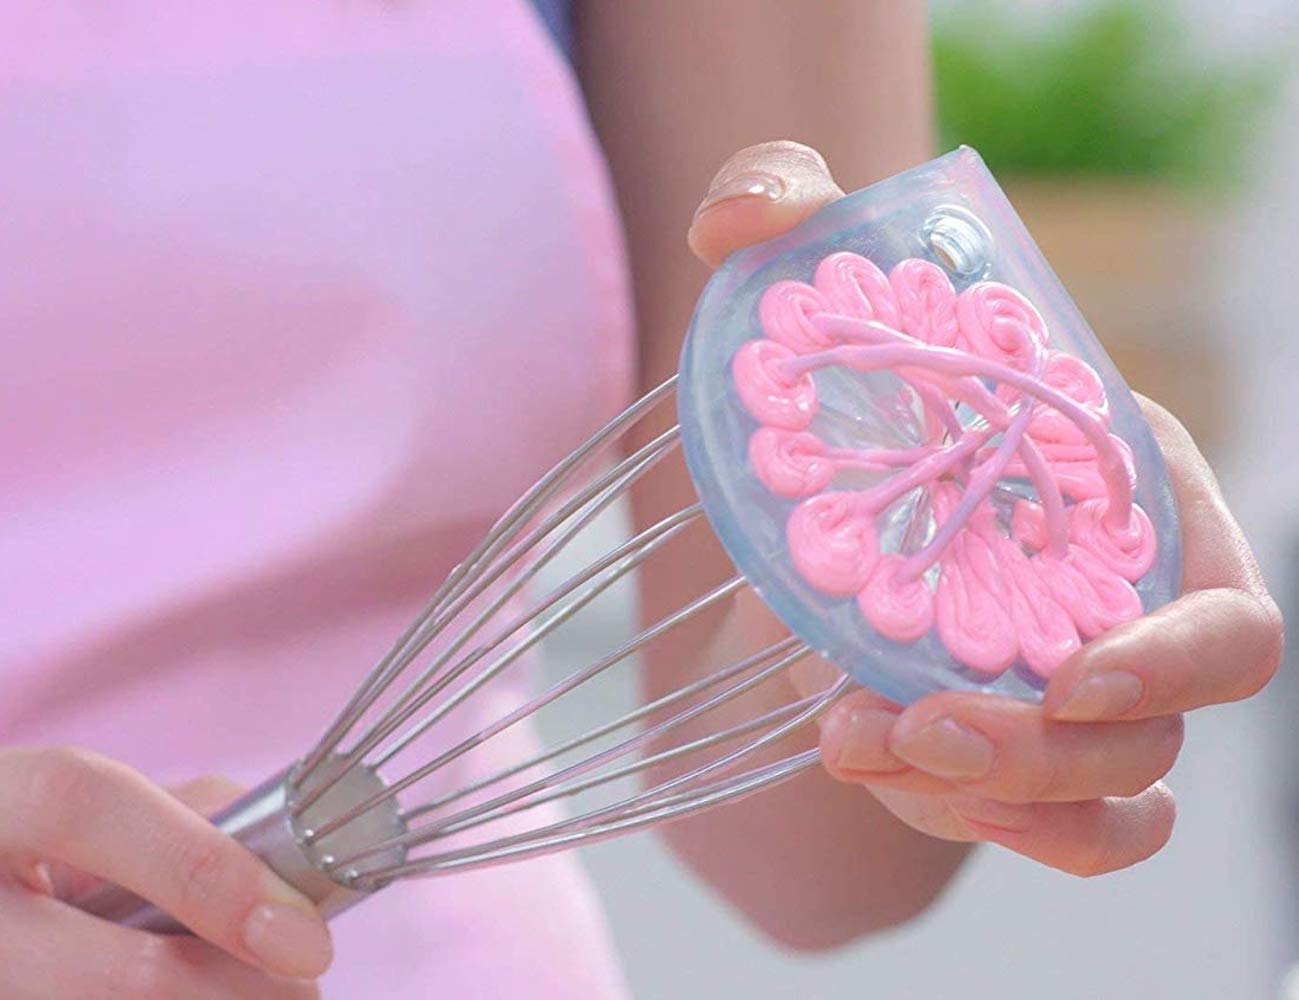 13 Innovative kitchen gadgets to improve your cooking